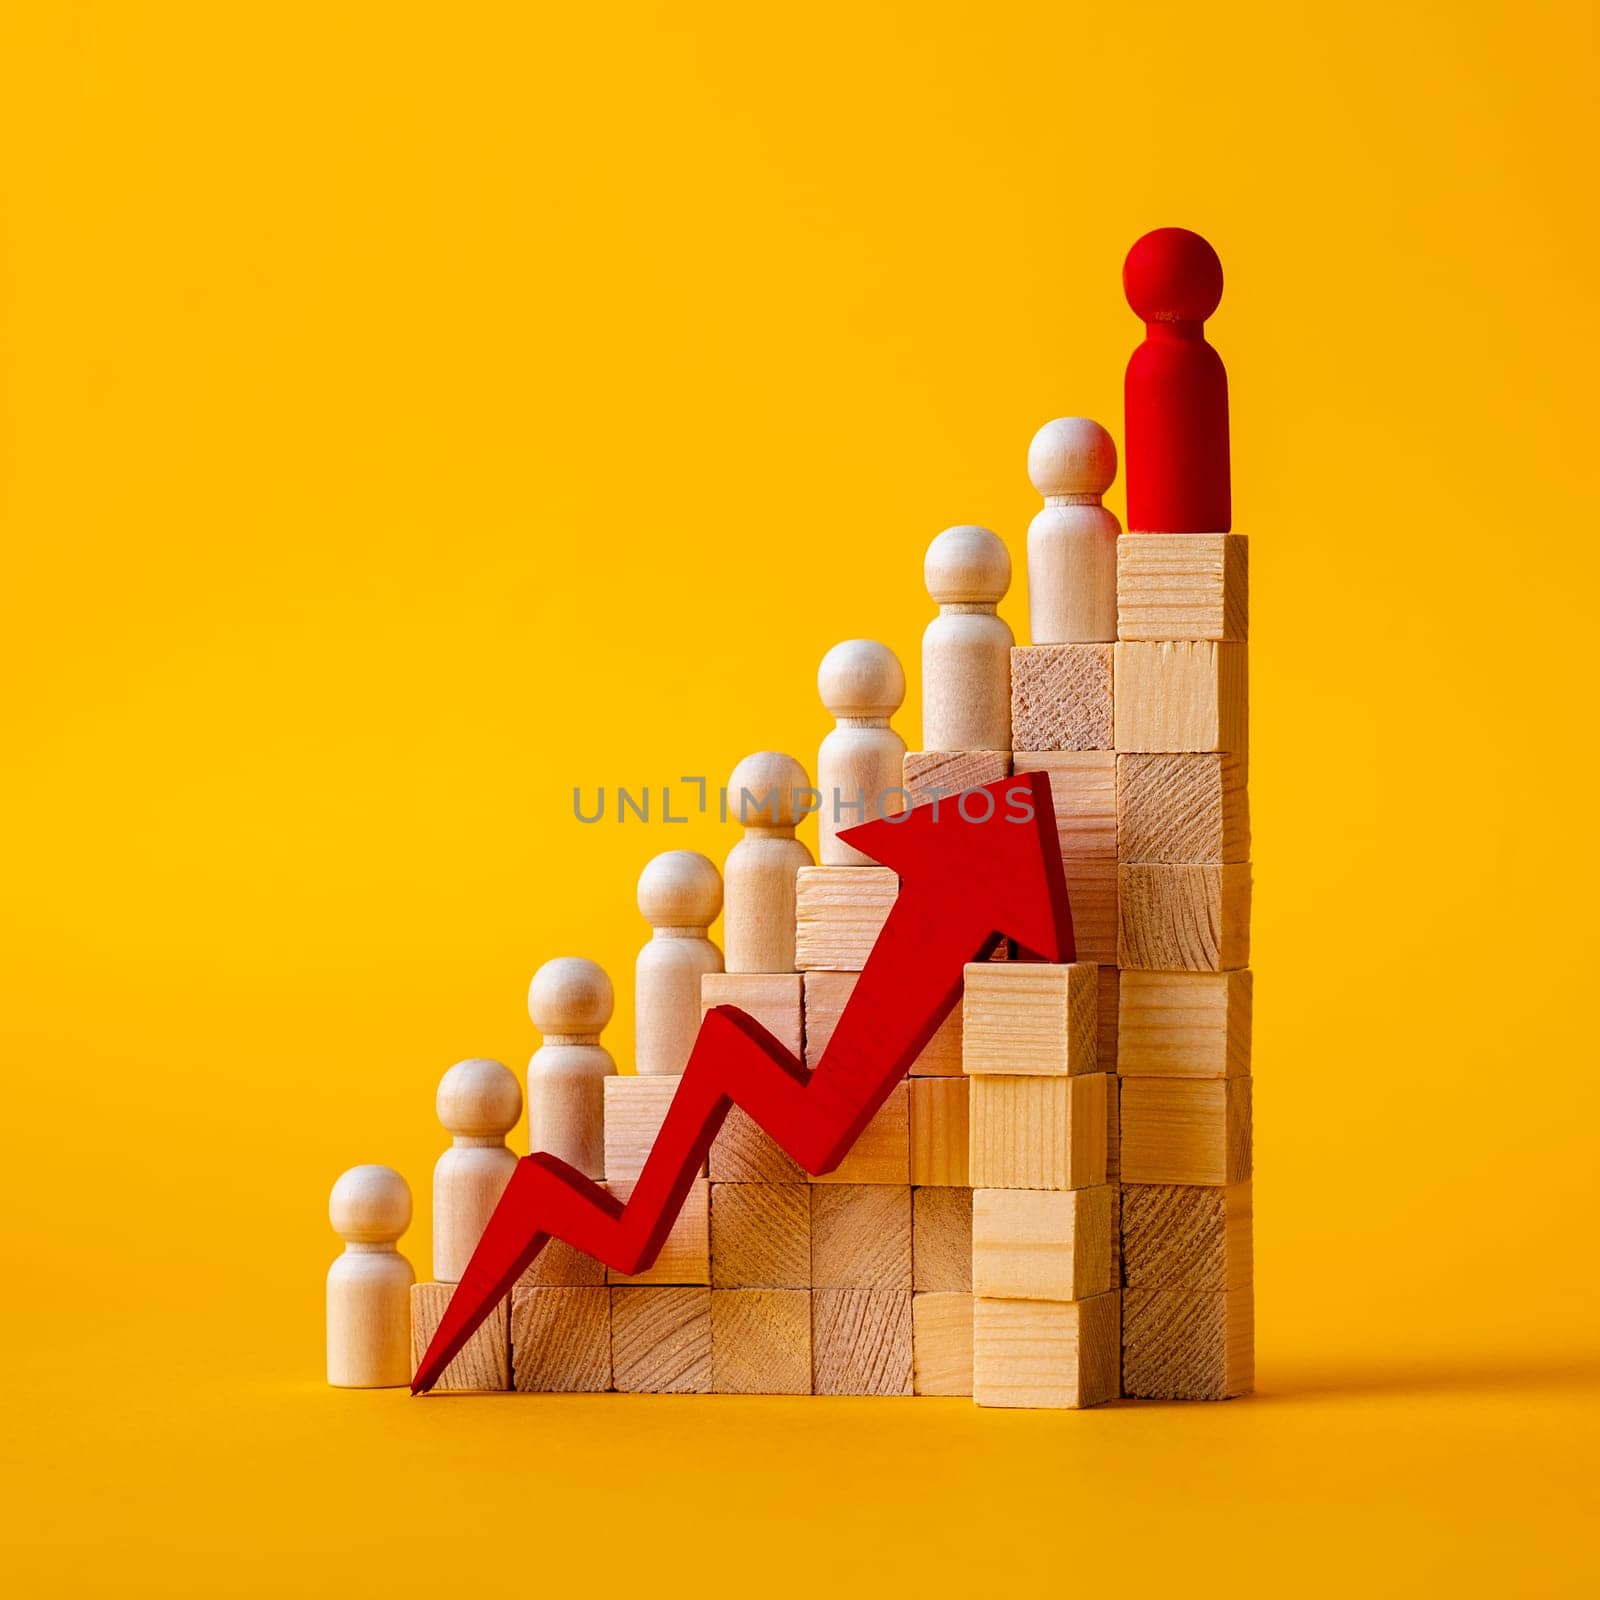 The concept of career growth. Wooden figurines stand on a ladder made wooden block on a yellow background. red arrow pointing up